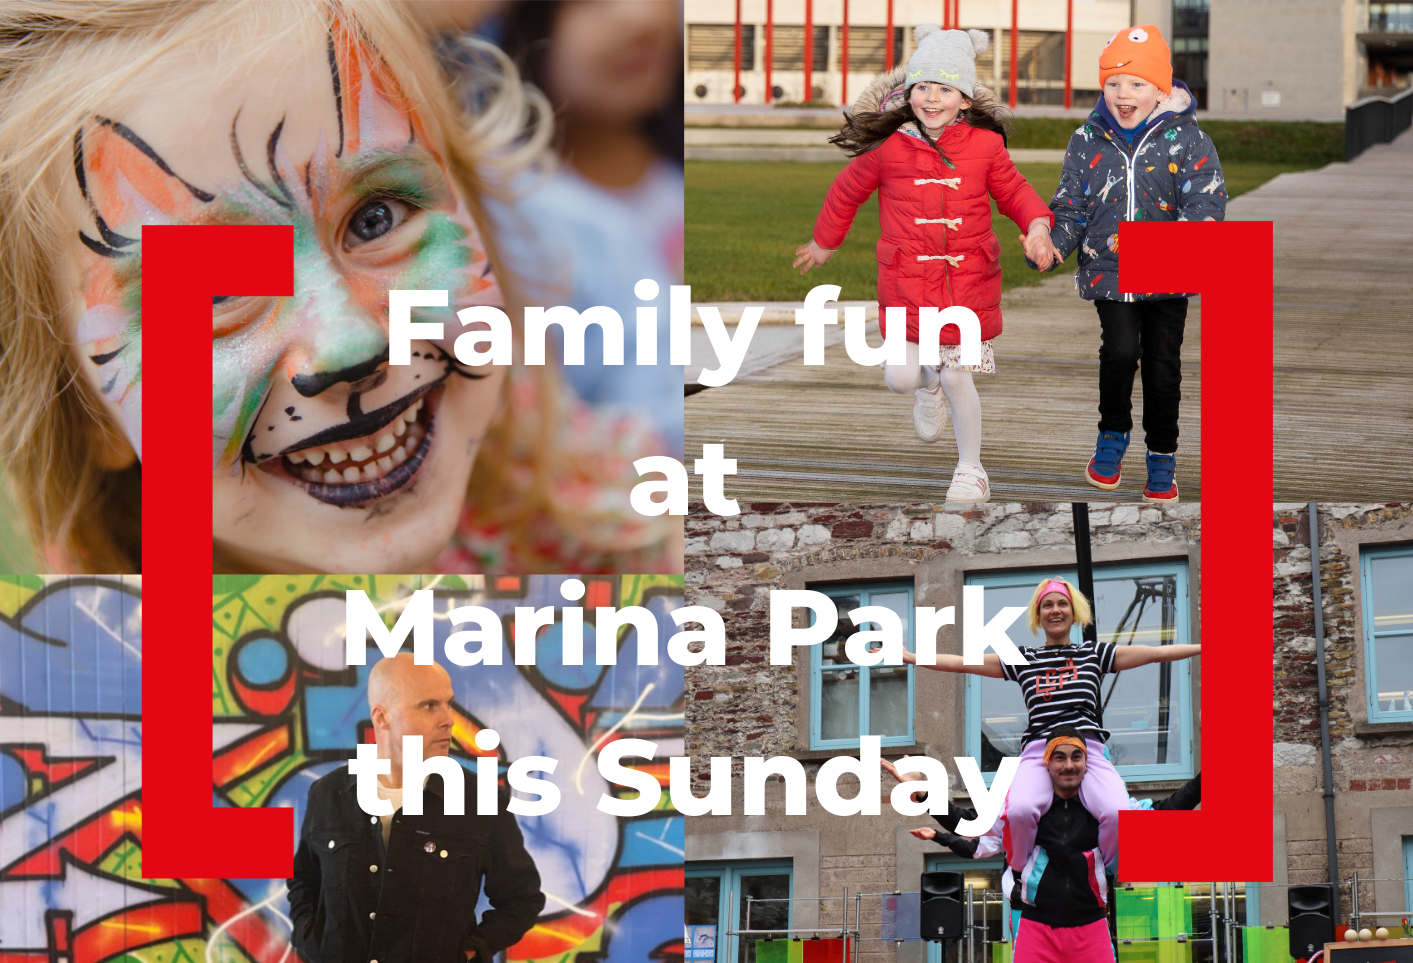 /corkcityco/en/council-services/news-room/latest-news/marina-park-grand-opening.png